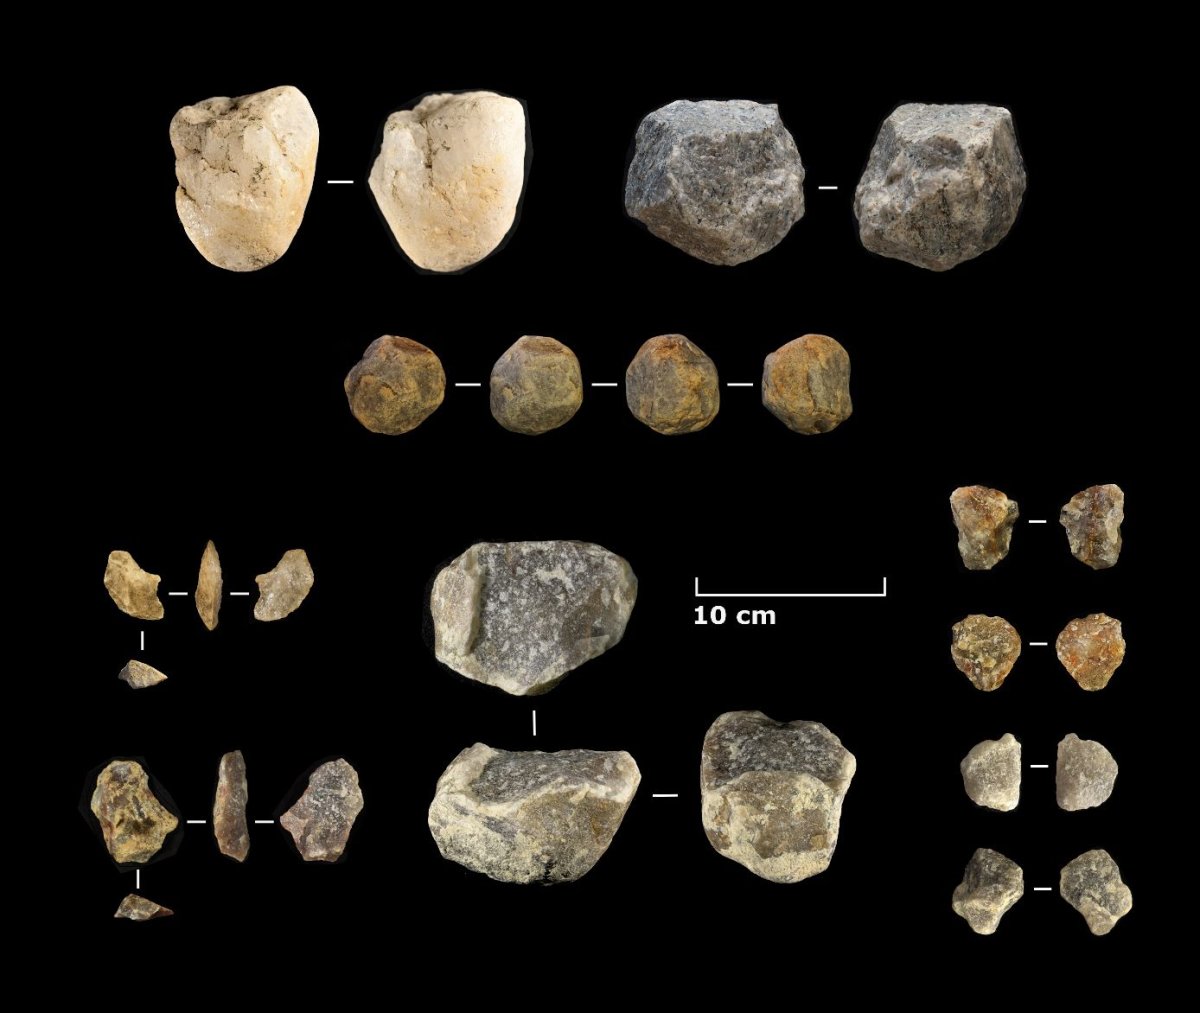 Stone tools found at Oldupai Gorge, an African site considered by many to be where humans first appeared are shown in this undated handout photo. To the uninitiated, they look like chipped rocks.
To Julio Mercader of the University of Calgary, they look like two-million-year-old messages from the earliest days of human technology. 